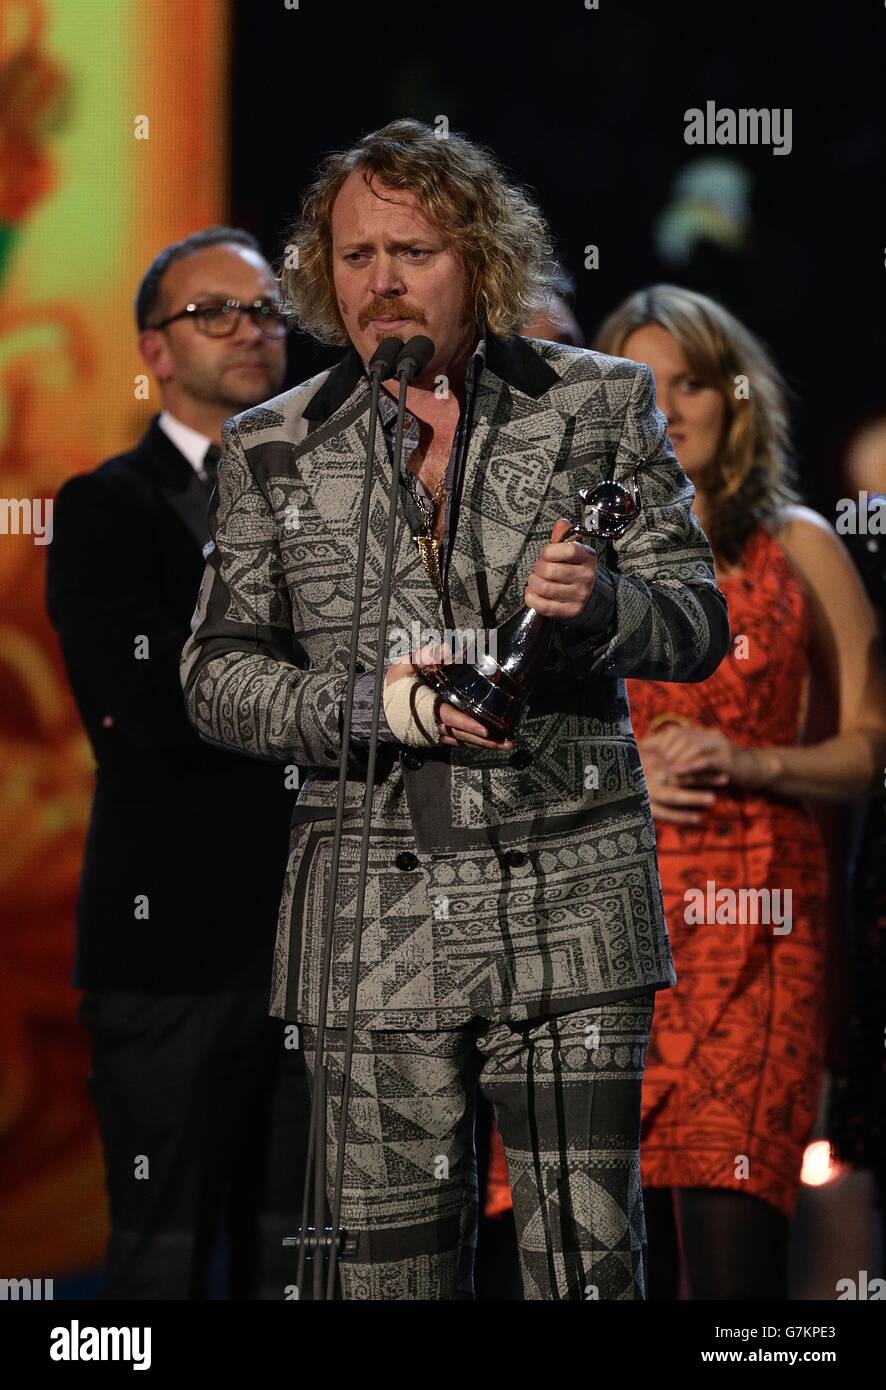 Leigh Francis accept the Multi Channnel National Television Award for Celebrity Juice during the 2015 National Television Awards at the O2 Arena, London. Stock Photo